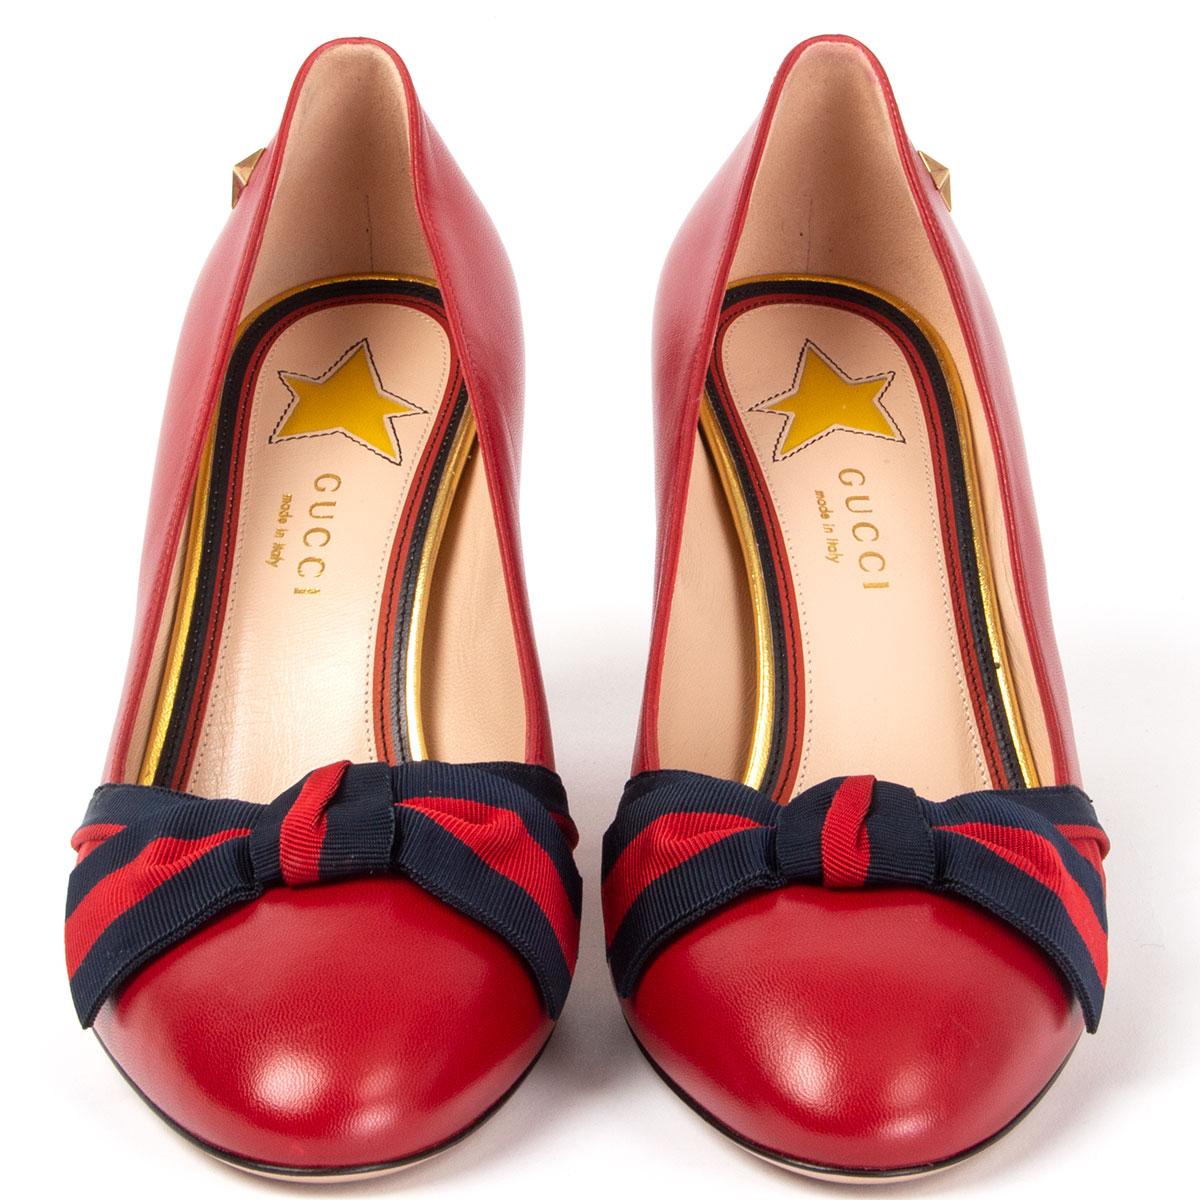 100% authentic Gucci Aline block-heel pumps in red leather featuring classic grosgrain Gucci Web bow detail. Brand new. Come with dust bag. 

Imprinted Size 39
Shoe Size 39
Inside Sole 26cm (10.1in)
Width 8cm (3.1in)
Heel 8cm (3.1in)

All our